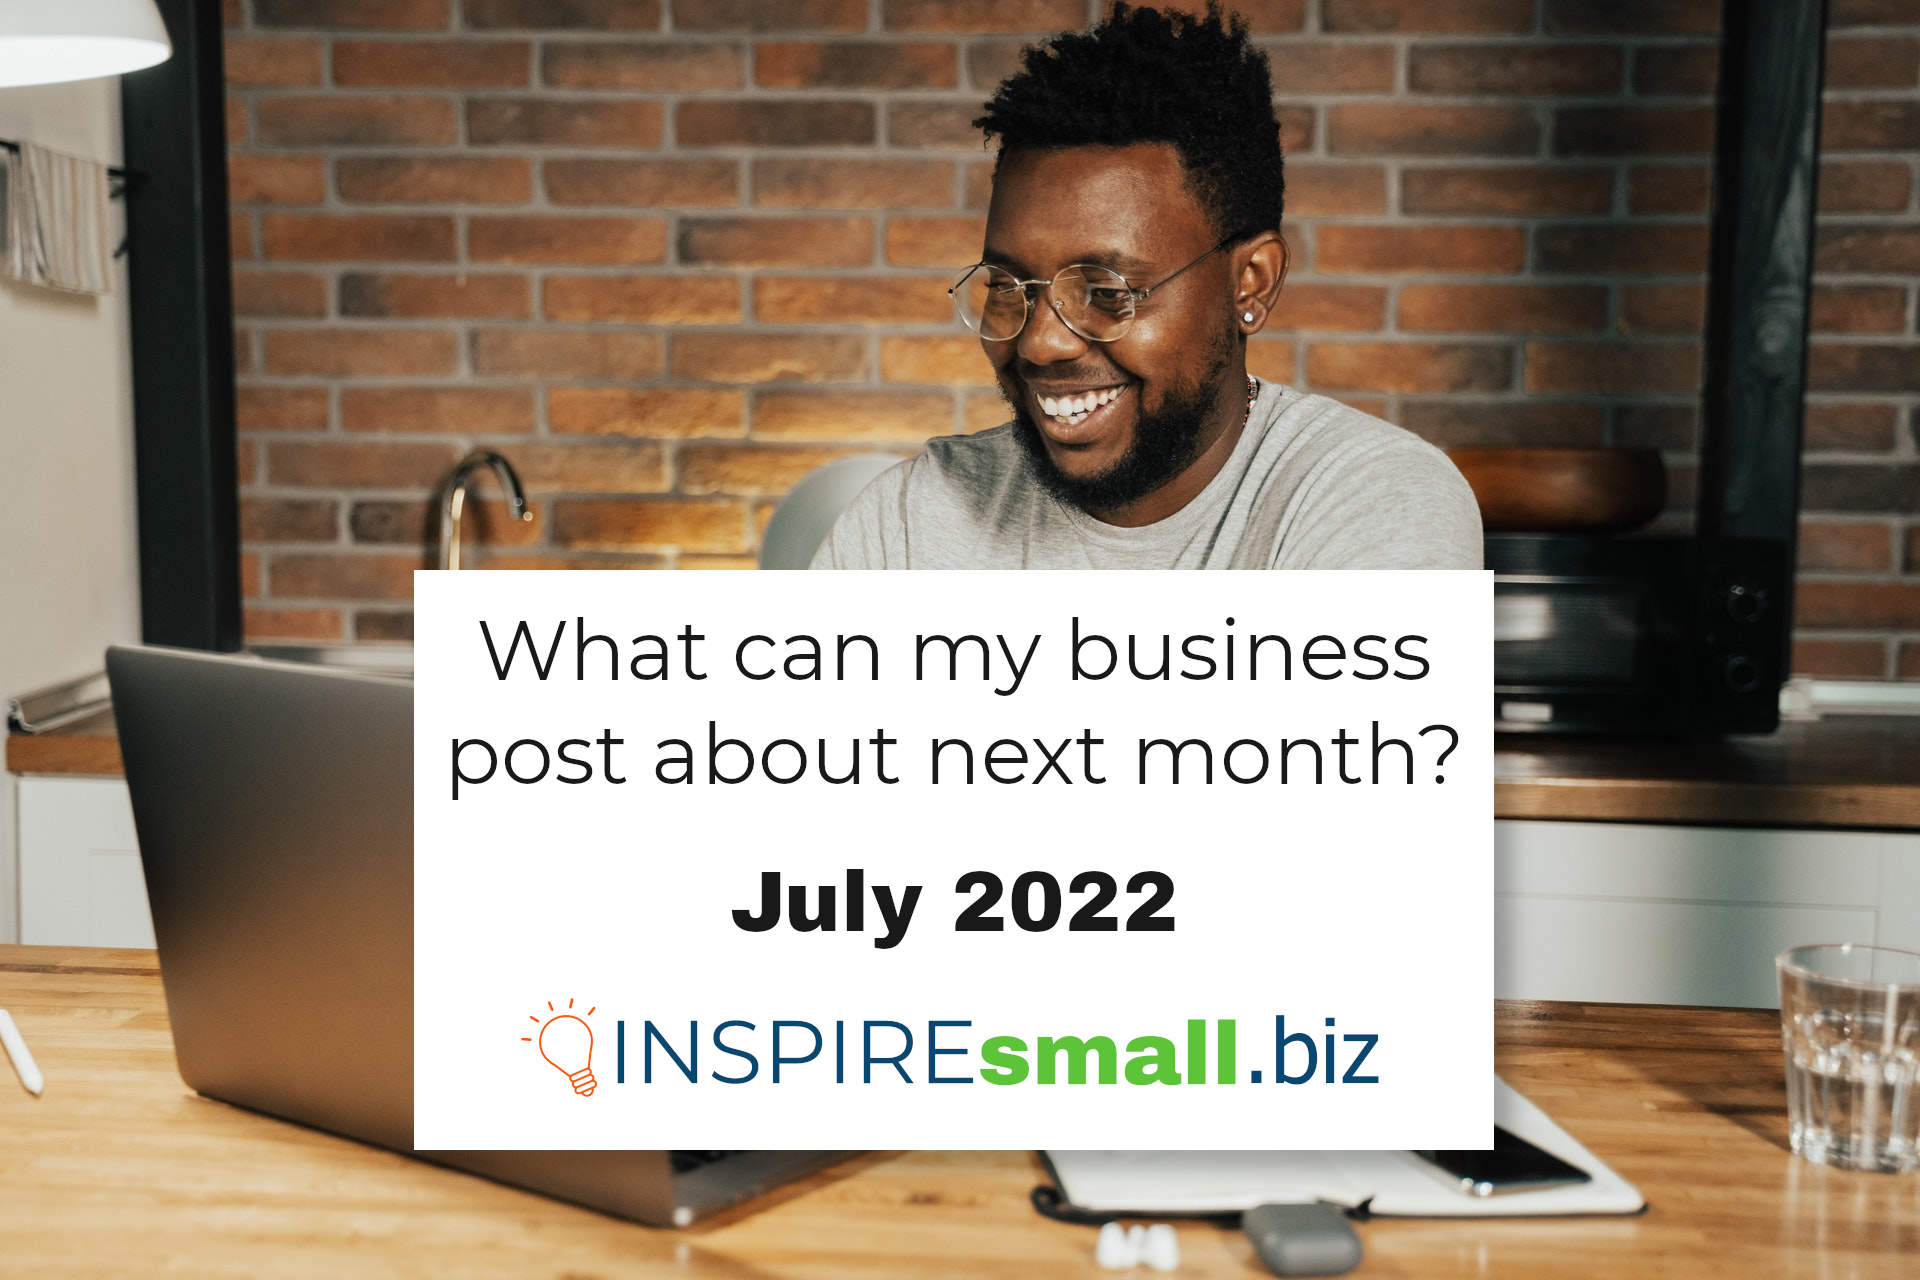 Text reading What Can My Business Post About Next Month? July 2022, from INSPIREsmall.biz over a background picture with a person sitting in front of a brick wall, at a light brown table, smiling at their computer.